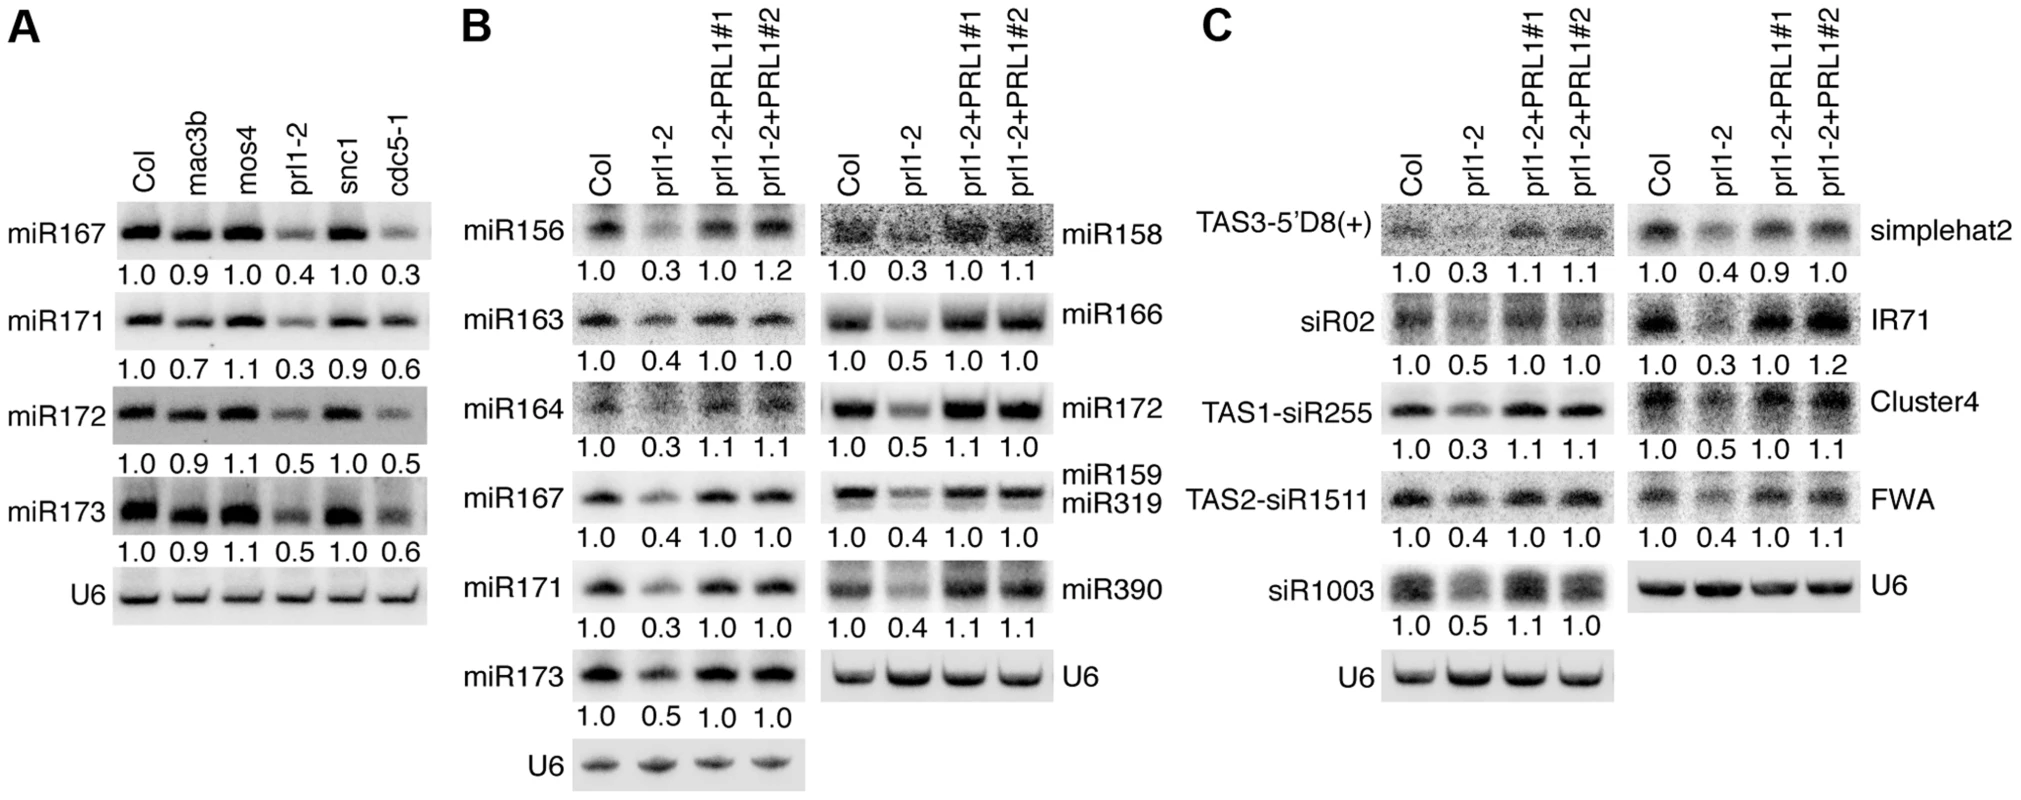 PRL1 is required for the accumulation of miRNAs.